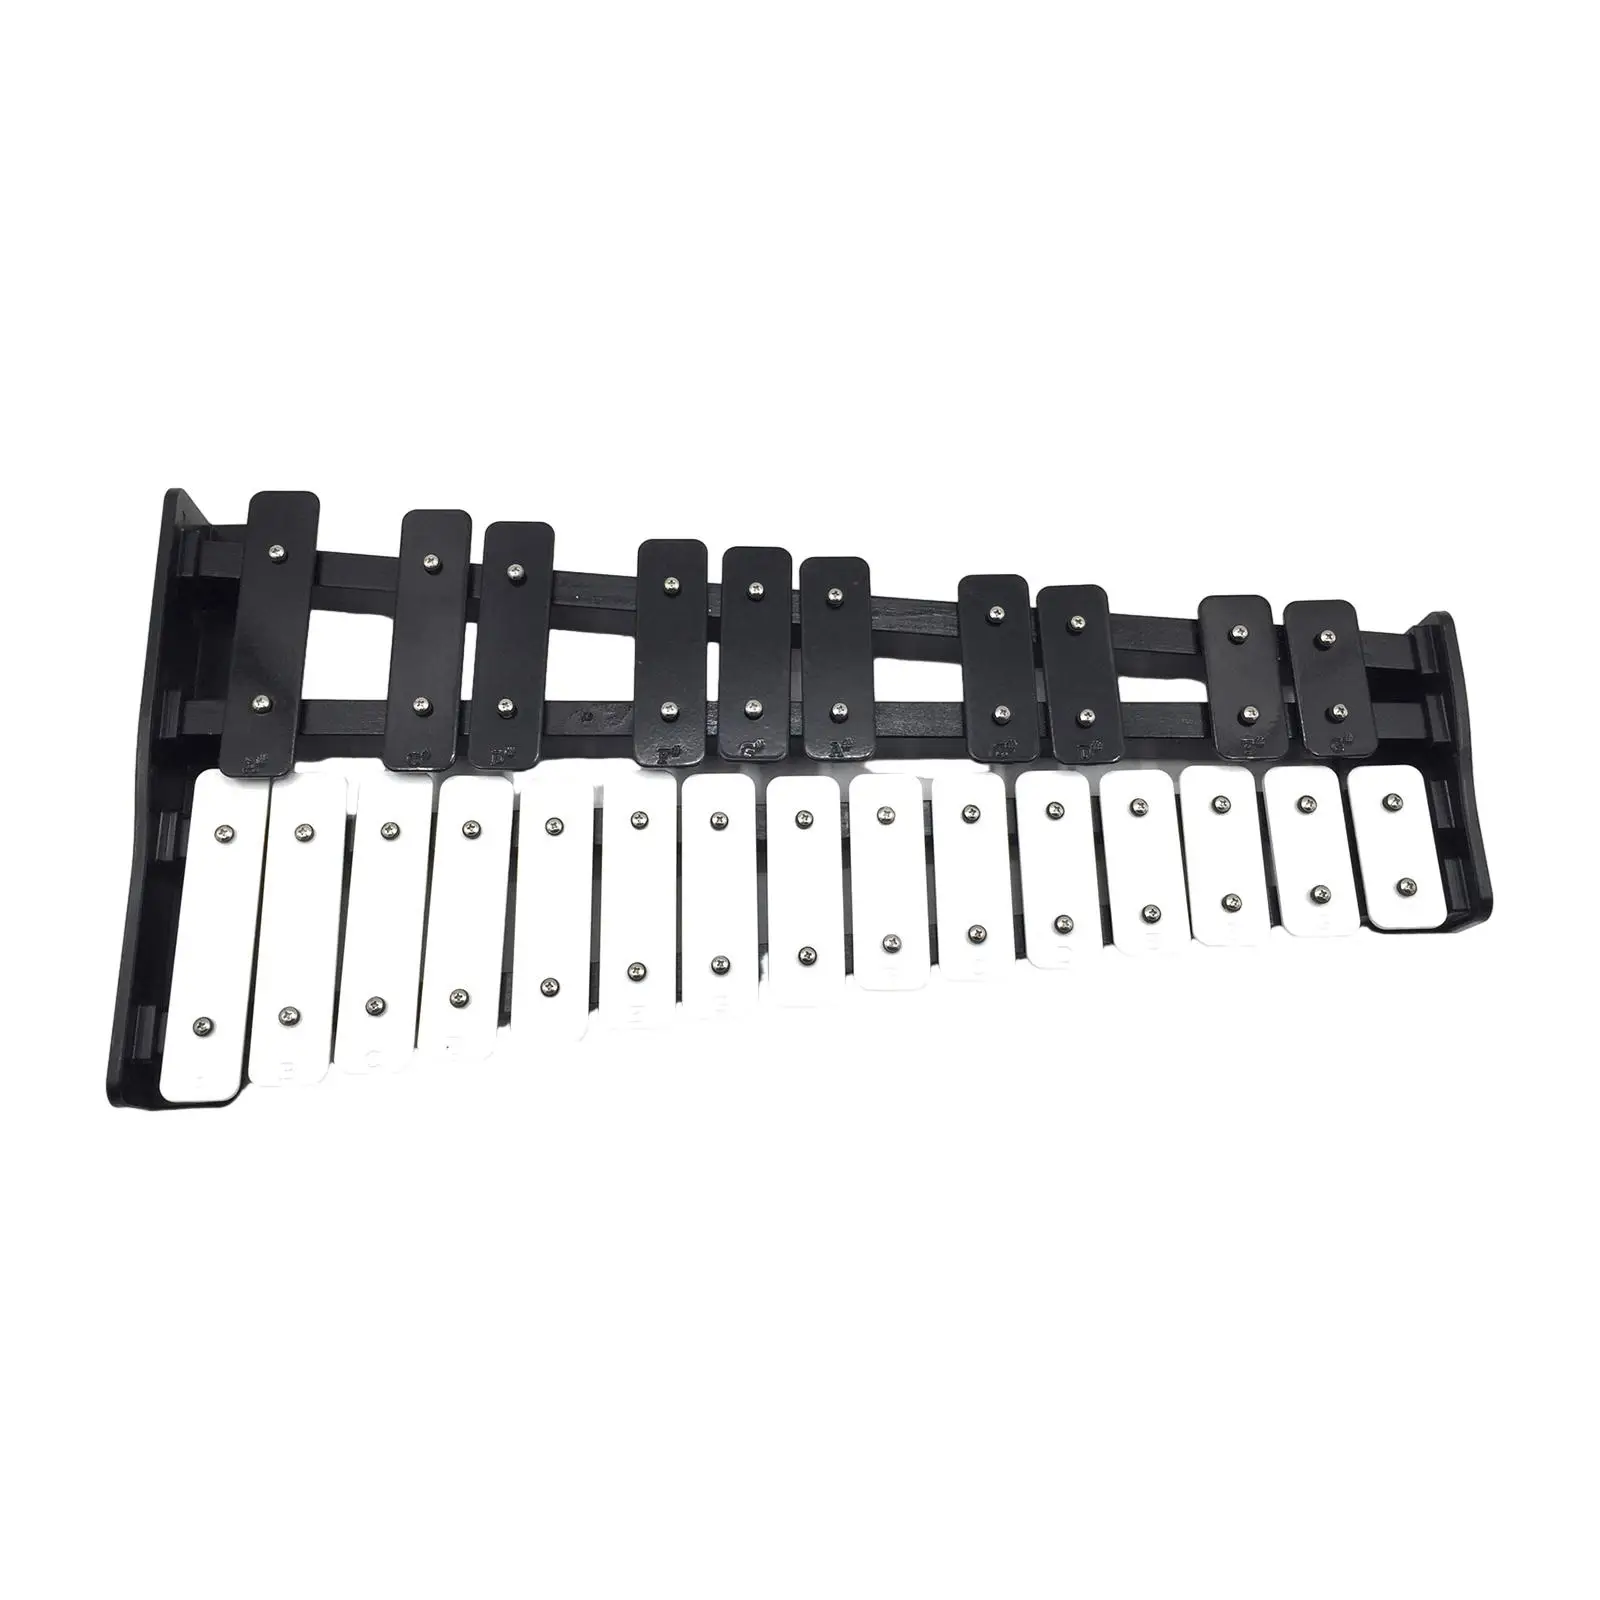 25 Note Glockenspiel Compact Gifts Portable for Beginners Xylophone Musical Educational Tuned Glockenspiel Musical Instrument